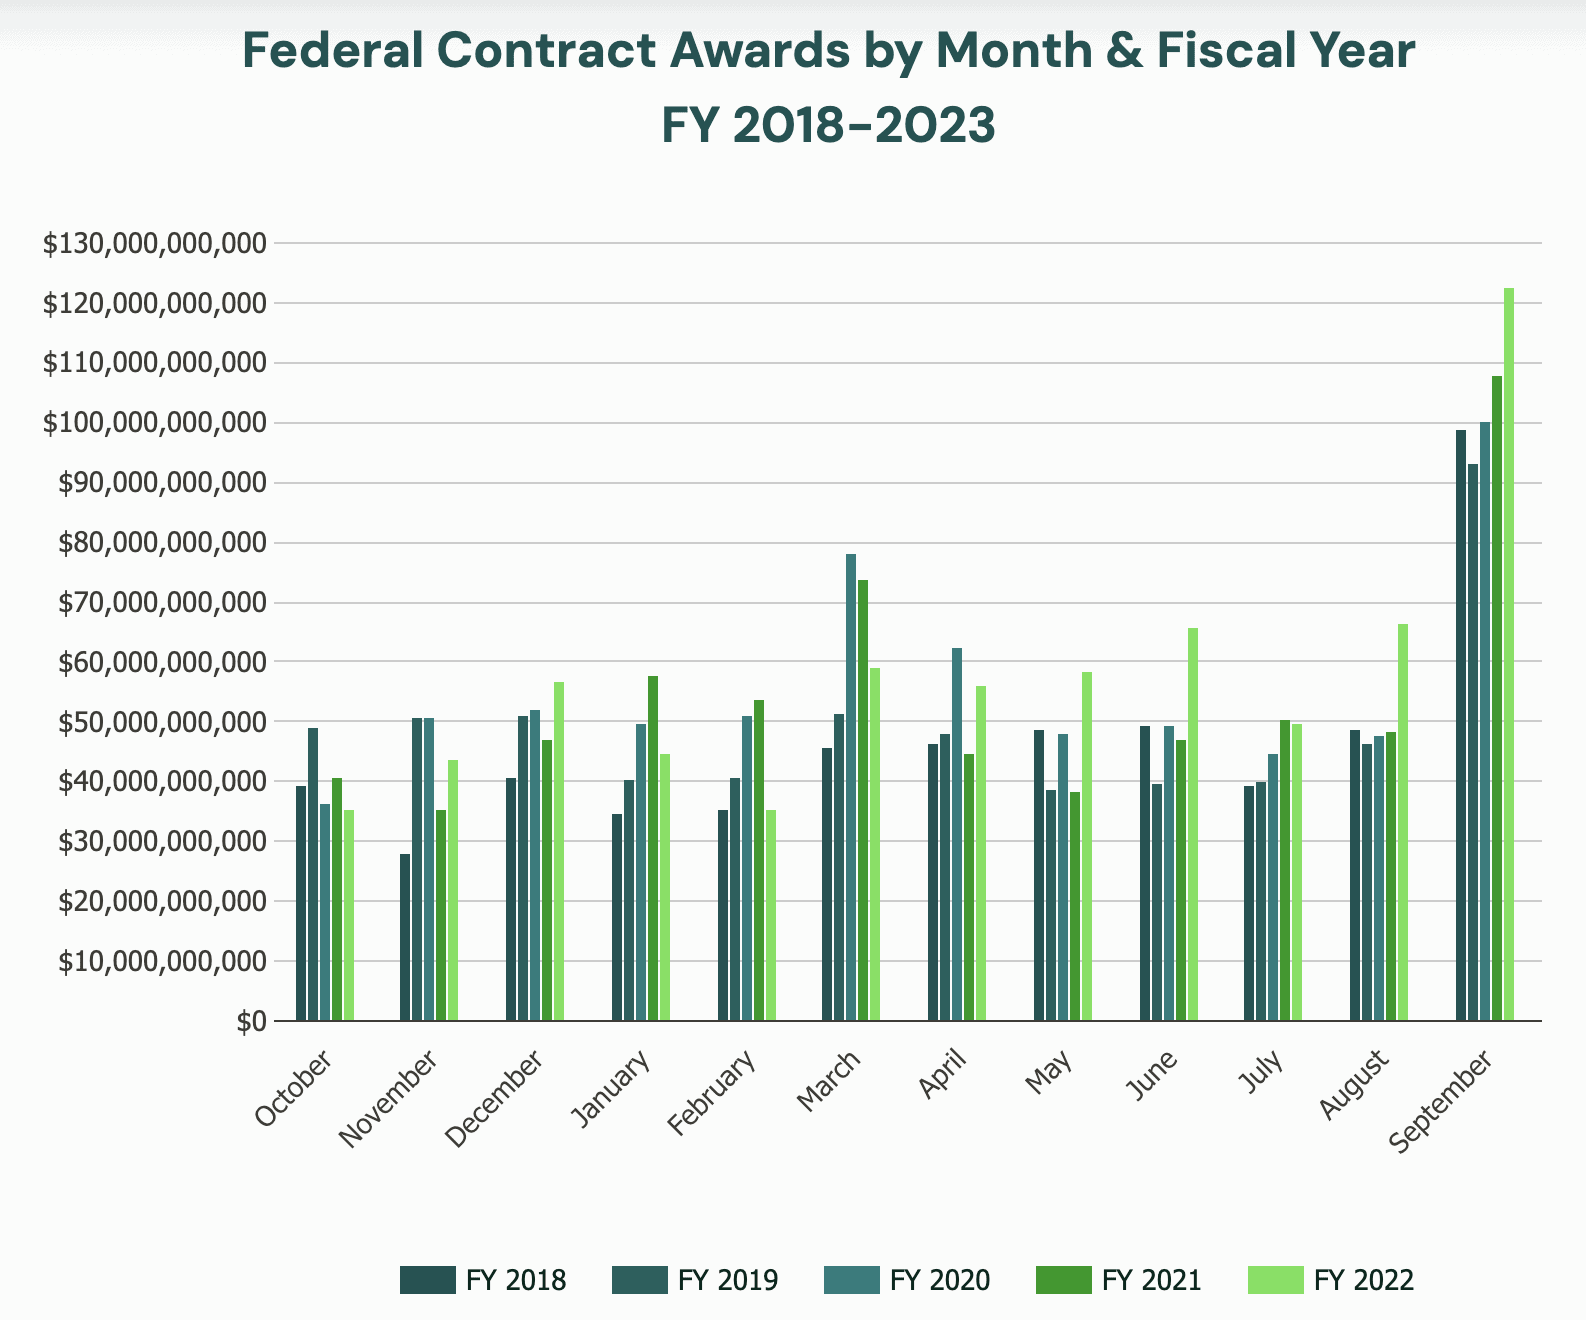 US Federal Government Procurement Fiscal Year-End is September 30